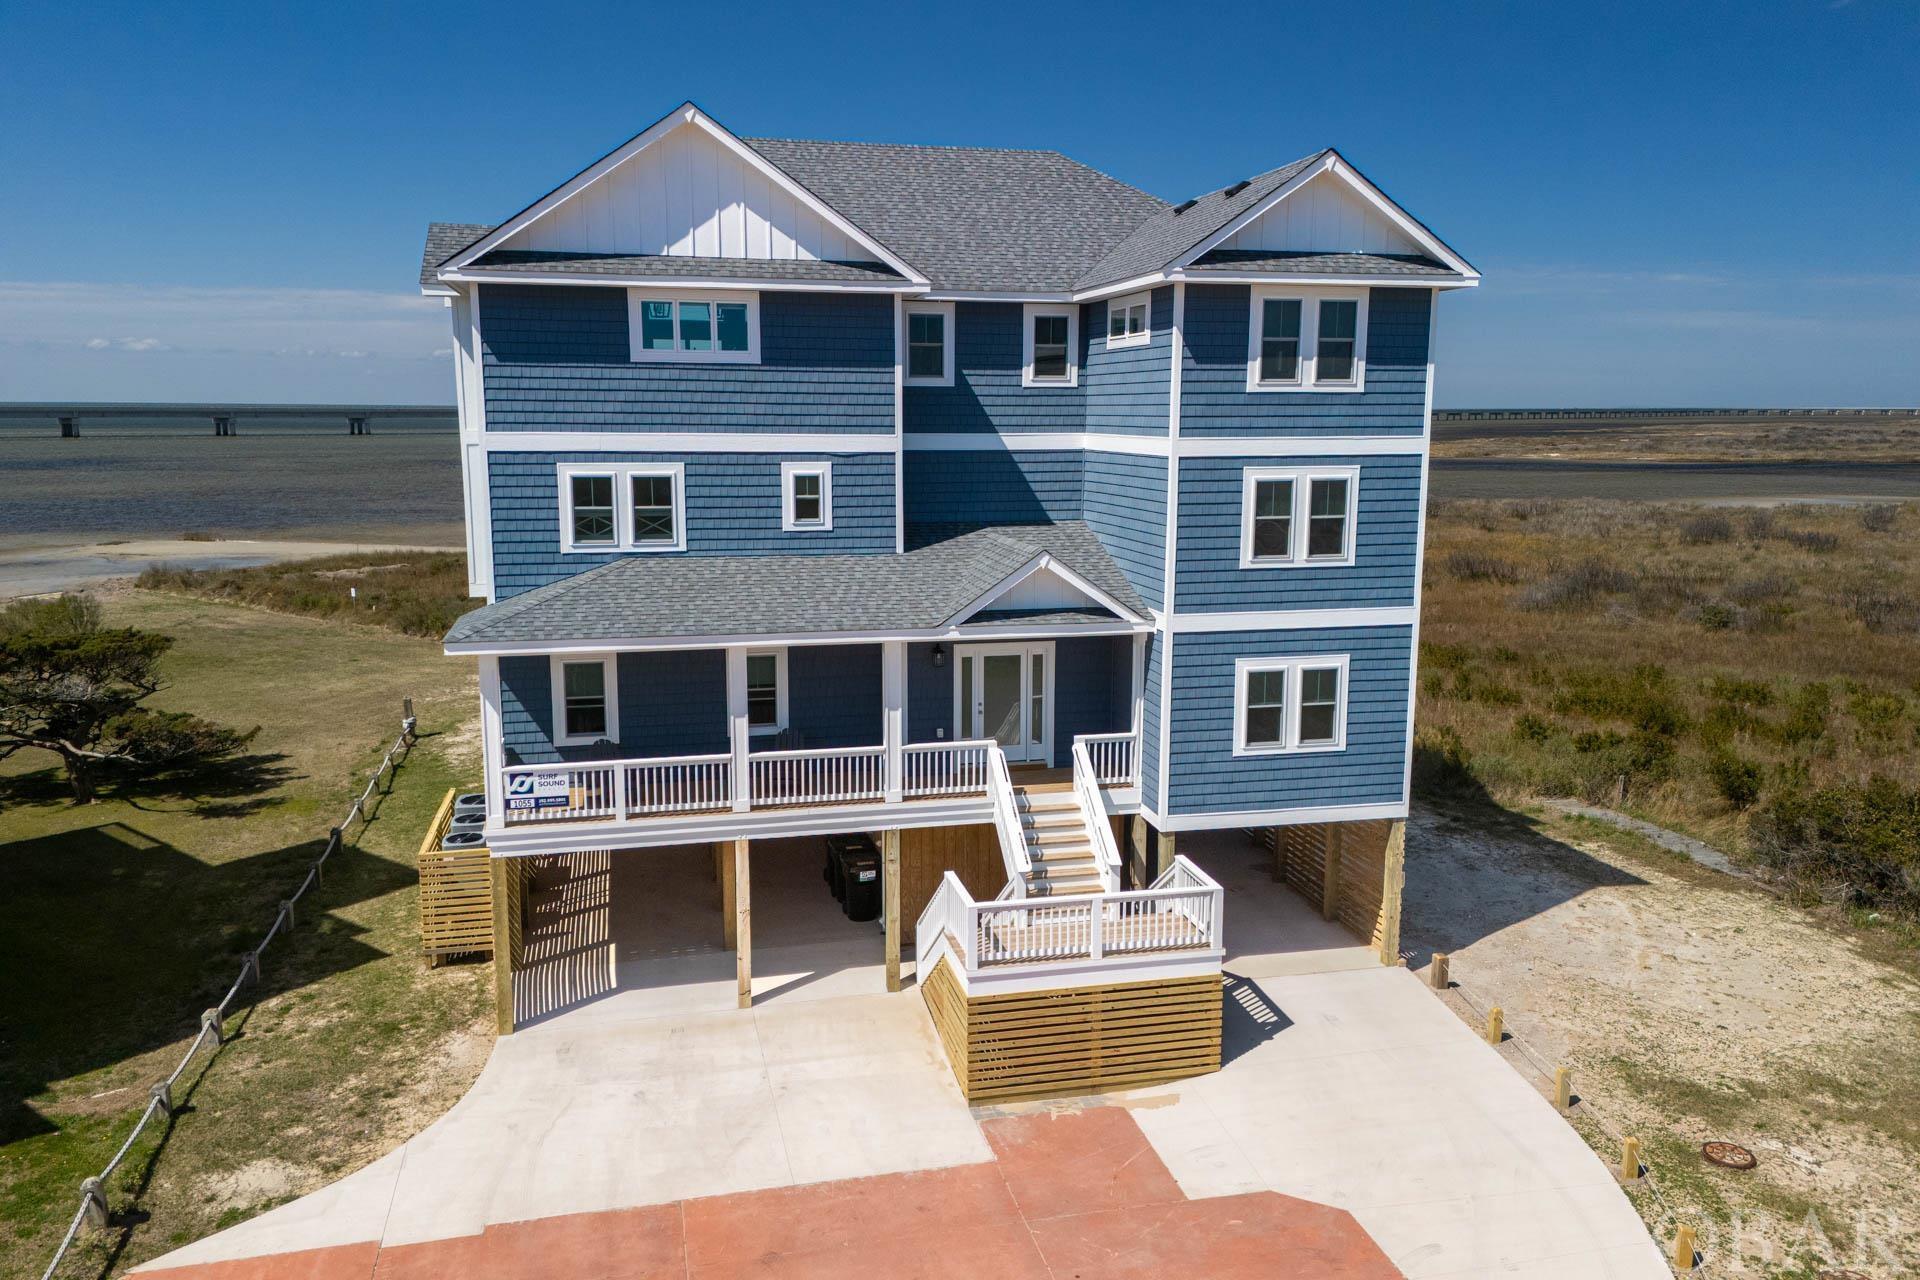 Priceless Views!!  Rare opportunity to own a Luxurious Soundfront Retreat with Panoramic Views!  You can watch the sunrise over the Atlantic and the sunset over the Pamlico sound.  Welcome to your coastal paradise in the serene subdivision of Mirlo Beach in Rodanthe, NC.  Private sandy beach with access to the sound to enjoy all water-sports or just exploring.  Close to the secluded beaches of Mirlo where there is a world class surfing beach and miles of uninhabited beach to enjoy with your family.  This magnificent soundfront home offers a rare and unique opportunity to own a piece of paradise with panoramic 270-degree views of the ocean, sound, and adjacent Pea Island National Wildlife Refuge.  There is a water view from every window.  Situated on a sprawling 28,000 square foot lot, this stunning property boasts 9 bedrooms, 9 full bathrooms, and 2 half baths spread across approximately 4500 square feet of living space.  Each bedroom features its own private bathroom and smart TV, ensuring comfort and convenience for all guests.  Step inside to discover a meticulously designed interior, featuring upgraded bathrooms with beautiful tile showers, luxury vinyl plank flooring throughout and an open concept living area with high vaulted ceilings and expansive water views.  The gourmet kitchen is a chef's dream, complete with quartz counters and backsplash, double refrigerators, double wall oven, stove top, and double dishwashers.  Entertain guests in style with three levels of decks facing the water, a private pool and hot tub, outdoor showers, and a game room equipped with a pool table and wet bar. Movie nights will be unforgettable in the home's theater room, while the nearby community courts offer tennis and pickleball for outdoor enthusiasts.  With its coastal design and abundance of decks and gathering areas, this property is the epitome of luxury beach living.  Built in 2022, this amazing home was built by Sandalwood Construction who is a premier builder with over 40 years experience designing and building fine homes on the Outer Banks.  This property is built to a standard for achieving low maintenance for the homeowner.  The builder combined roof shingles, exterior siding, composite trim, windows, doors and construction techniques that collectively create a product that will stand up to the elements and be a sustainable home for years to come!  The new bridge routes traffic around Mirlo Beach creating a new and improved 'north end' of Rodanthe that will have no through traffic. No more busy streets to cross when you are going to the beach! This is an incredible location for your dream 2nd home or investment home. Enjoy everything that Hatteras Island has to offer such as pristine uncrowded beaches, world class kite boarding and surfing, fishing and amazing local restaurants and fresh seafood.  This home is not your ordinary investment property.  It is a fine home that blends a once in a lifetime location and high quality construction for the most discriminating of buyers.  Don't miss your chance to own this extraordinary soundfront retreat in Rodanthe!